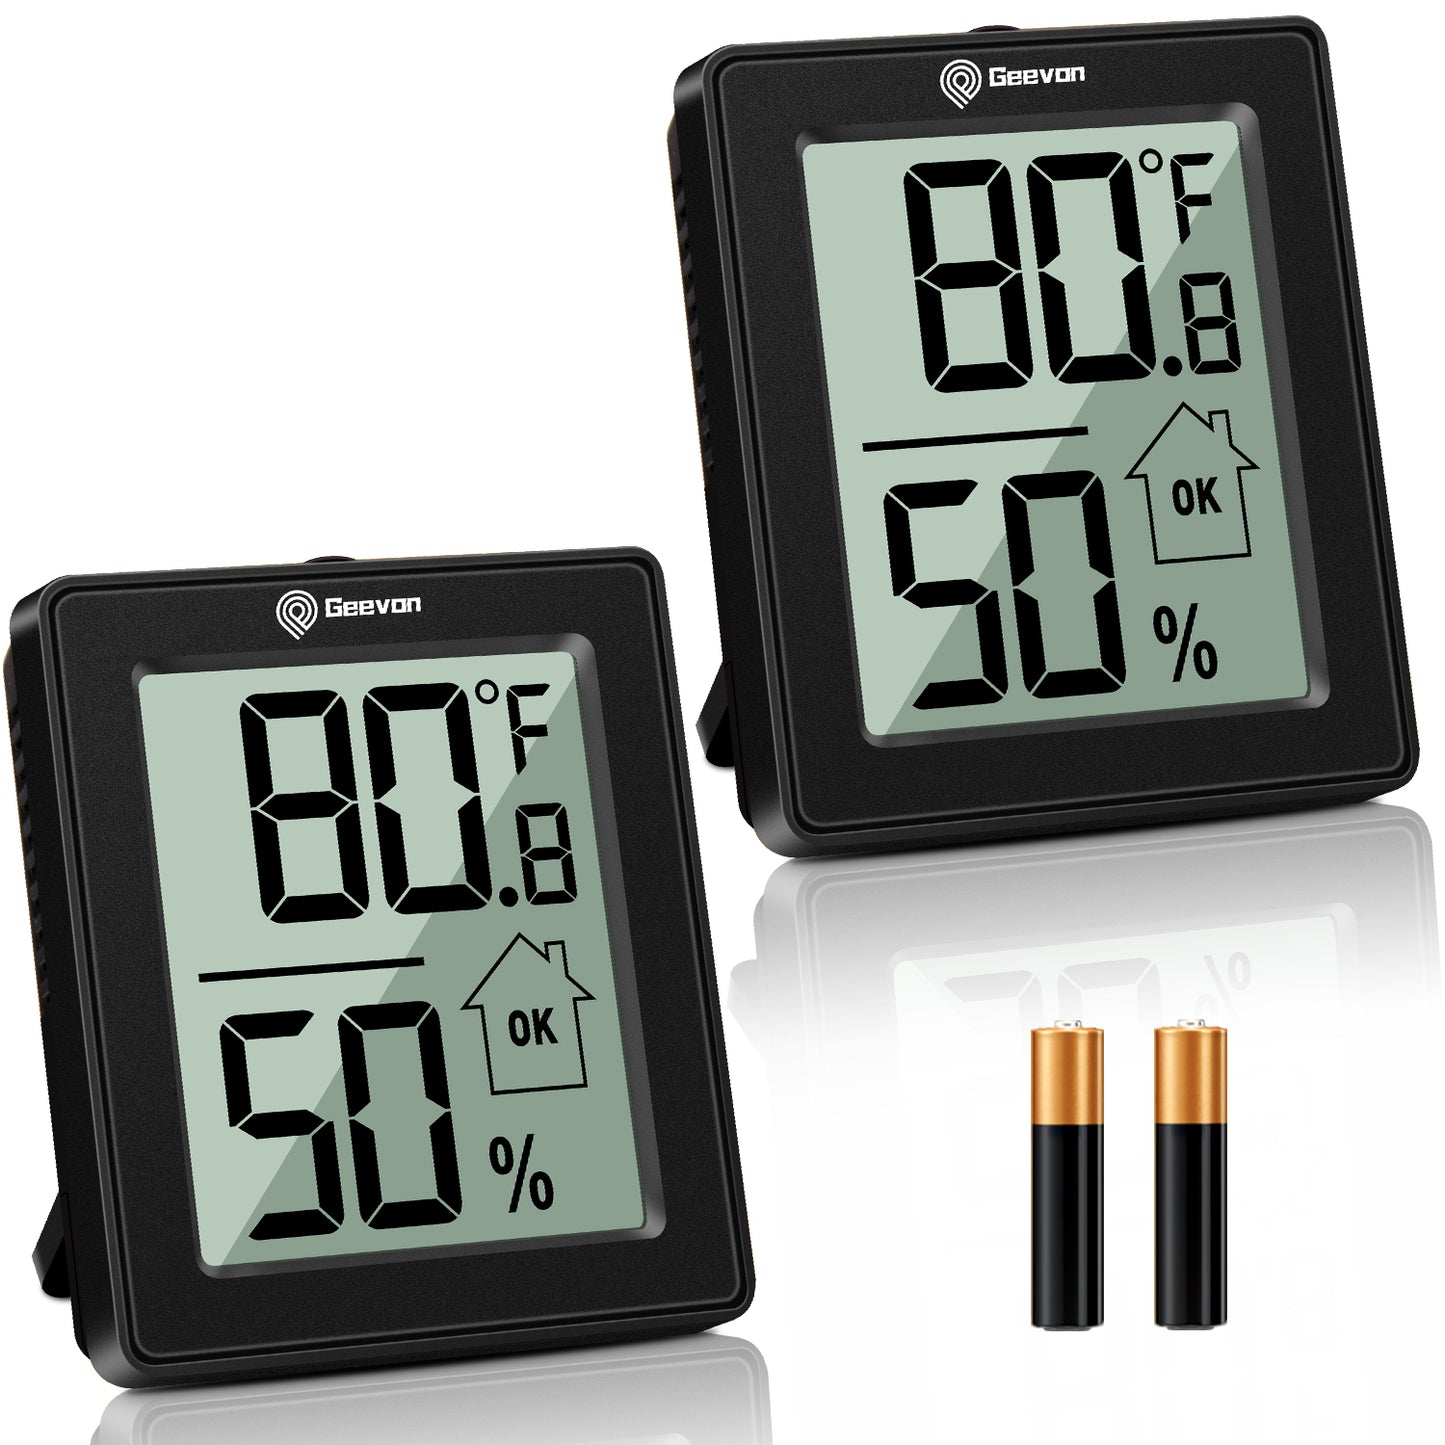 Geevon Hygrometer Indoor Thermometer Room Humidity Gauge with Battery,Digital Temperature Gauge Humidity Meter Indicator for Home, Office, Greenhouse, Mini Hygrometer,Black 2pack